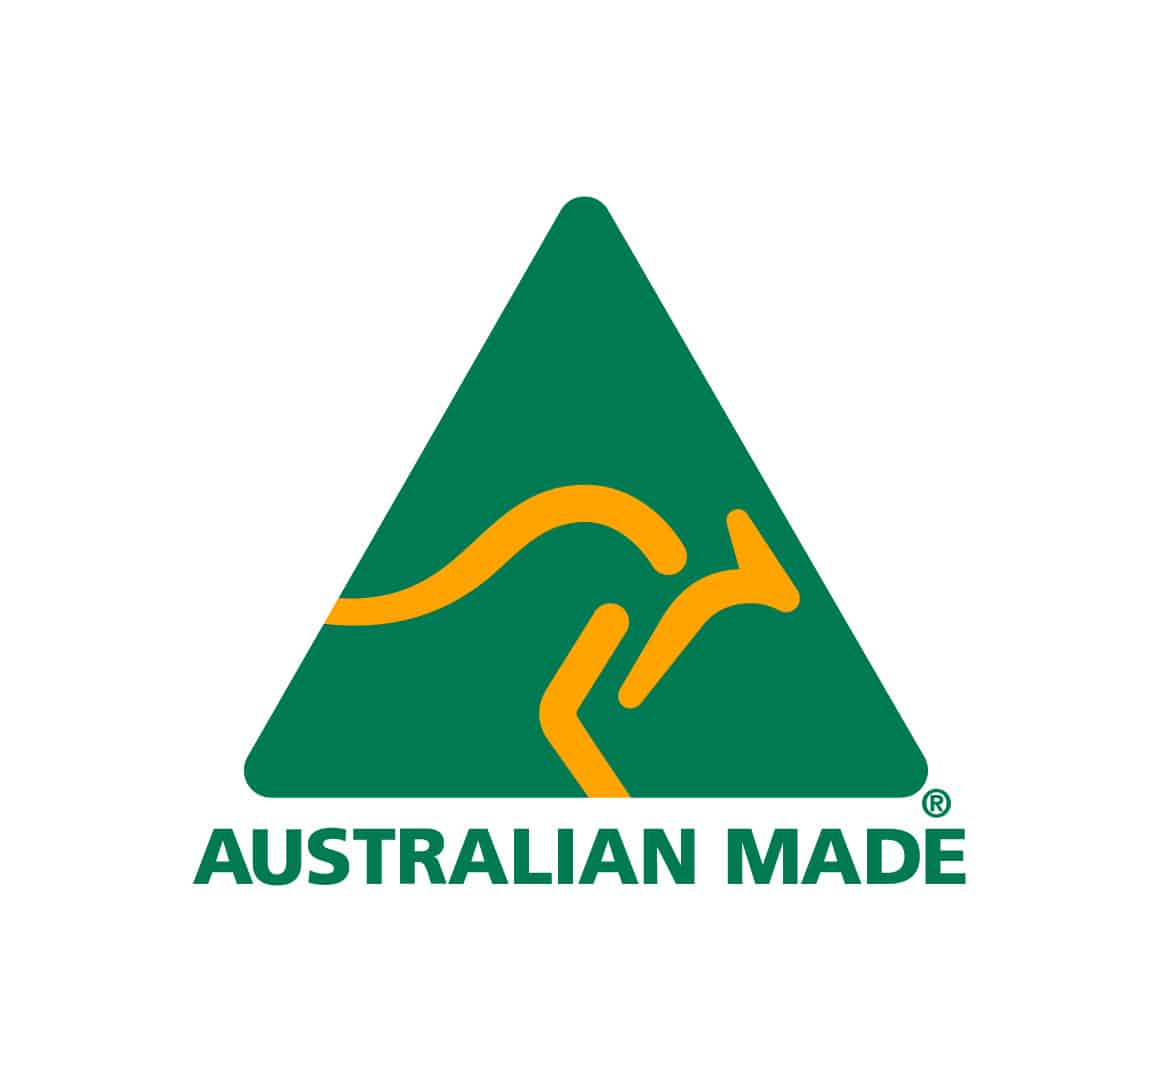 Artisans Bespoke Jewellers are proudly certified as being ‘Australian Made’